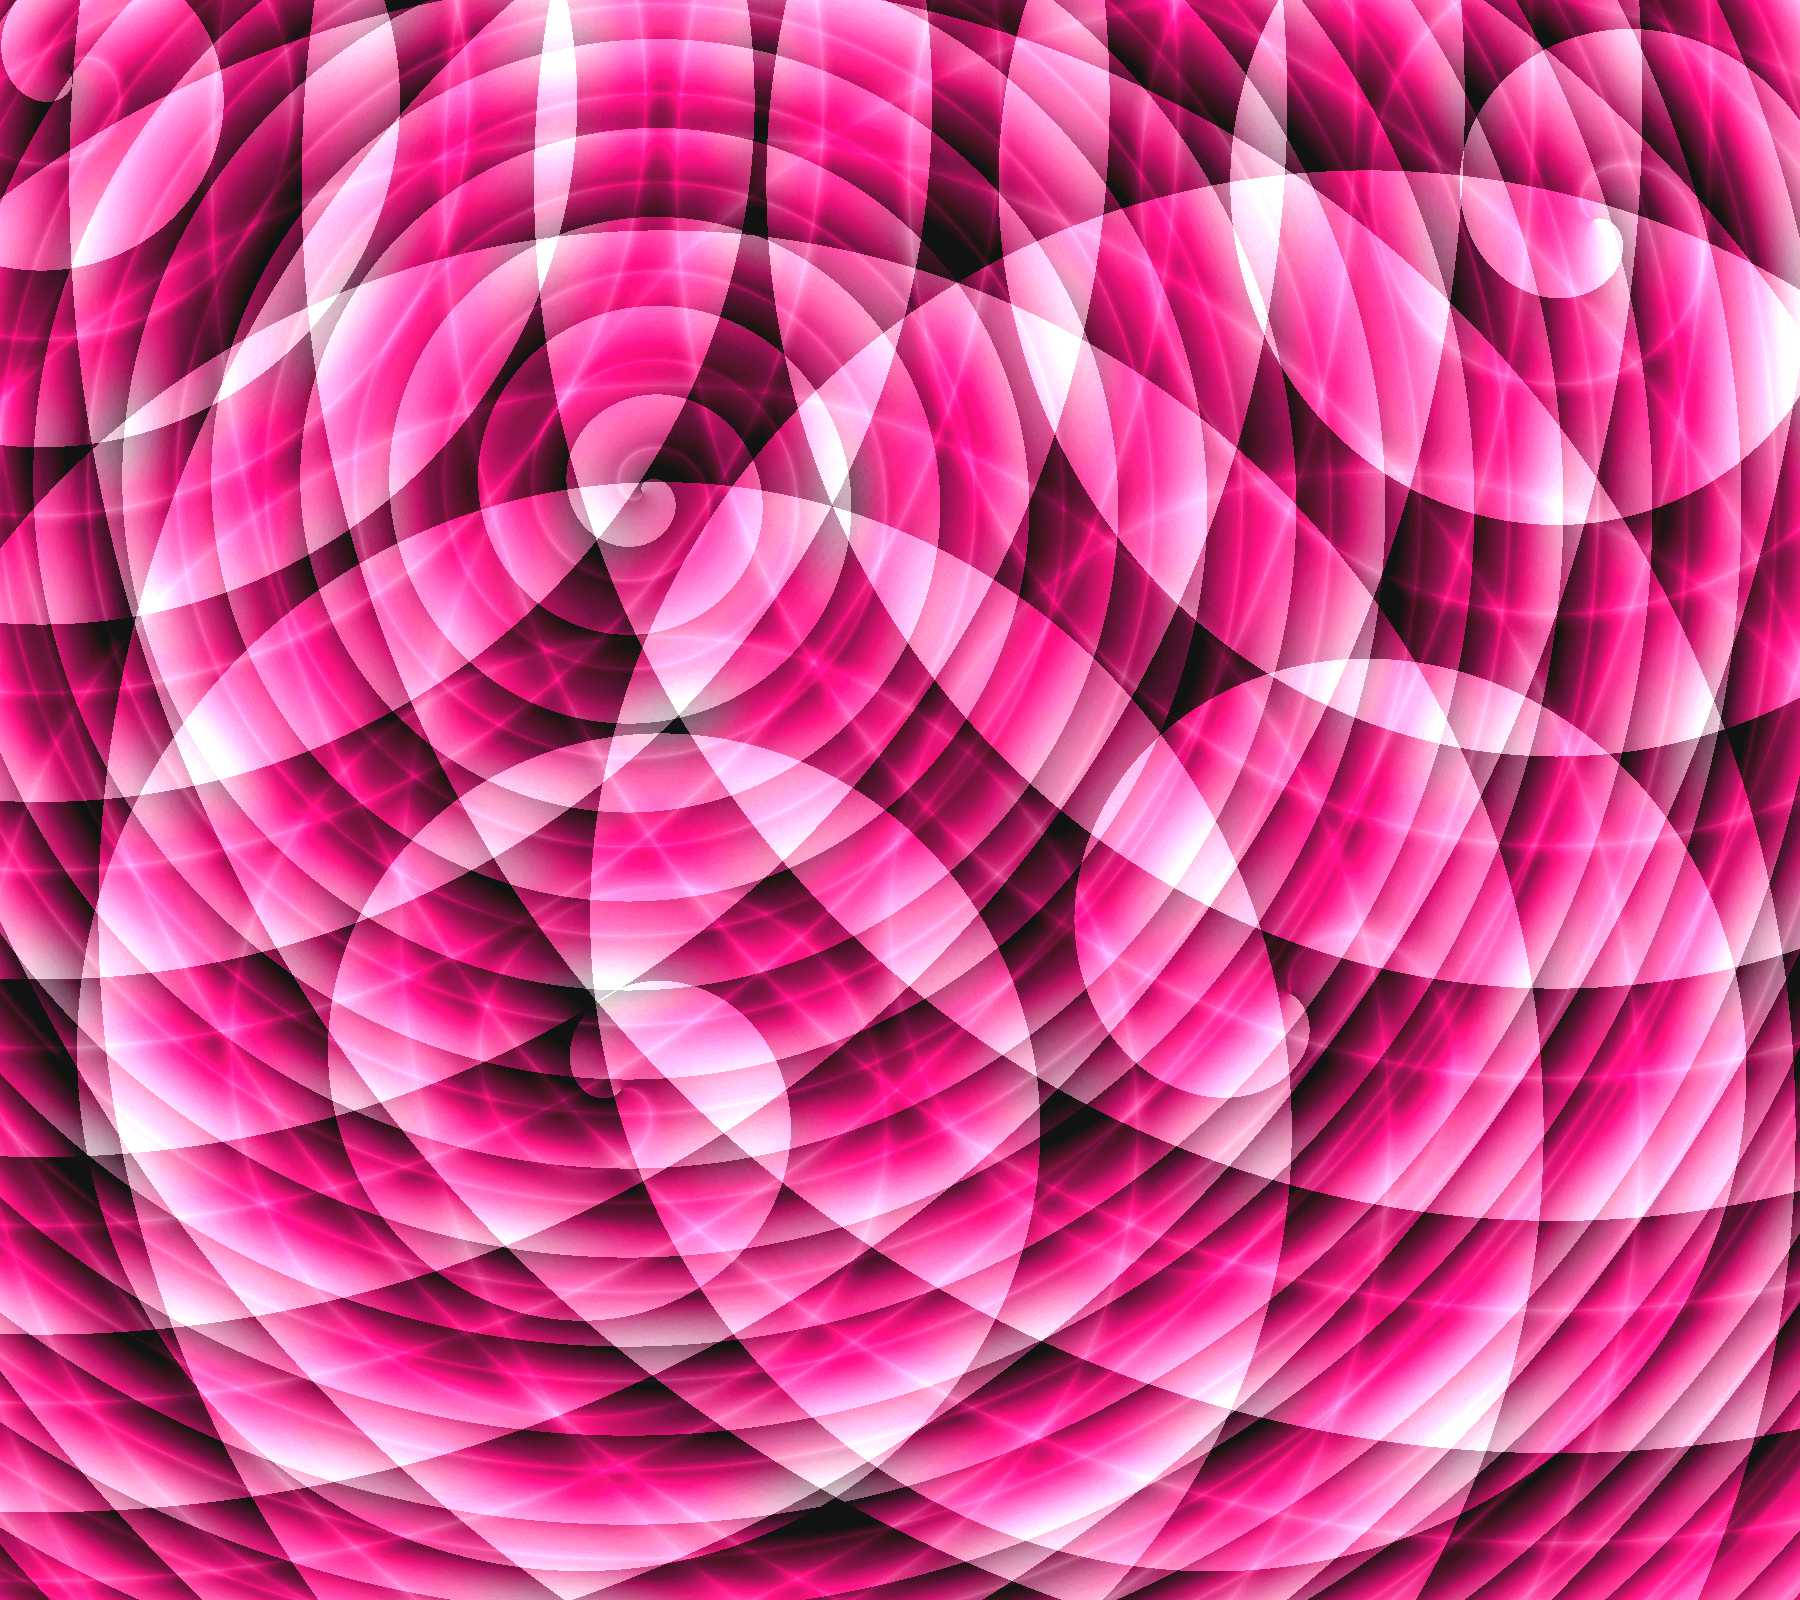 Hot Pink Spiral Designs Black And White Wallpaper